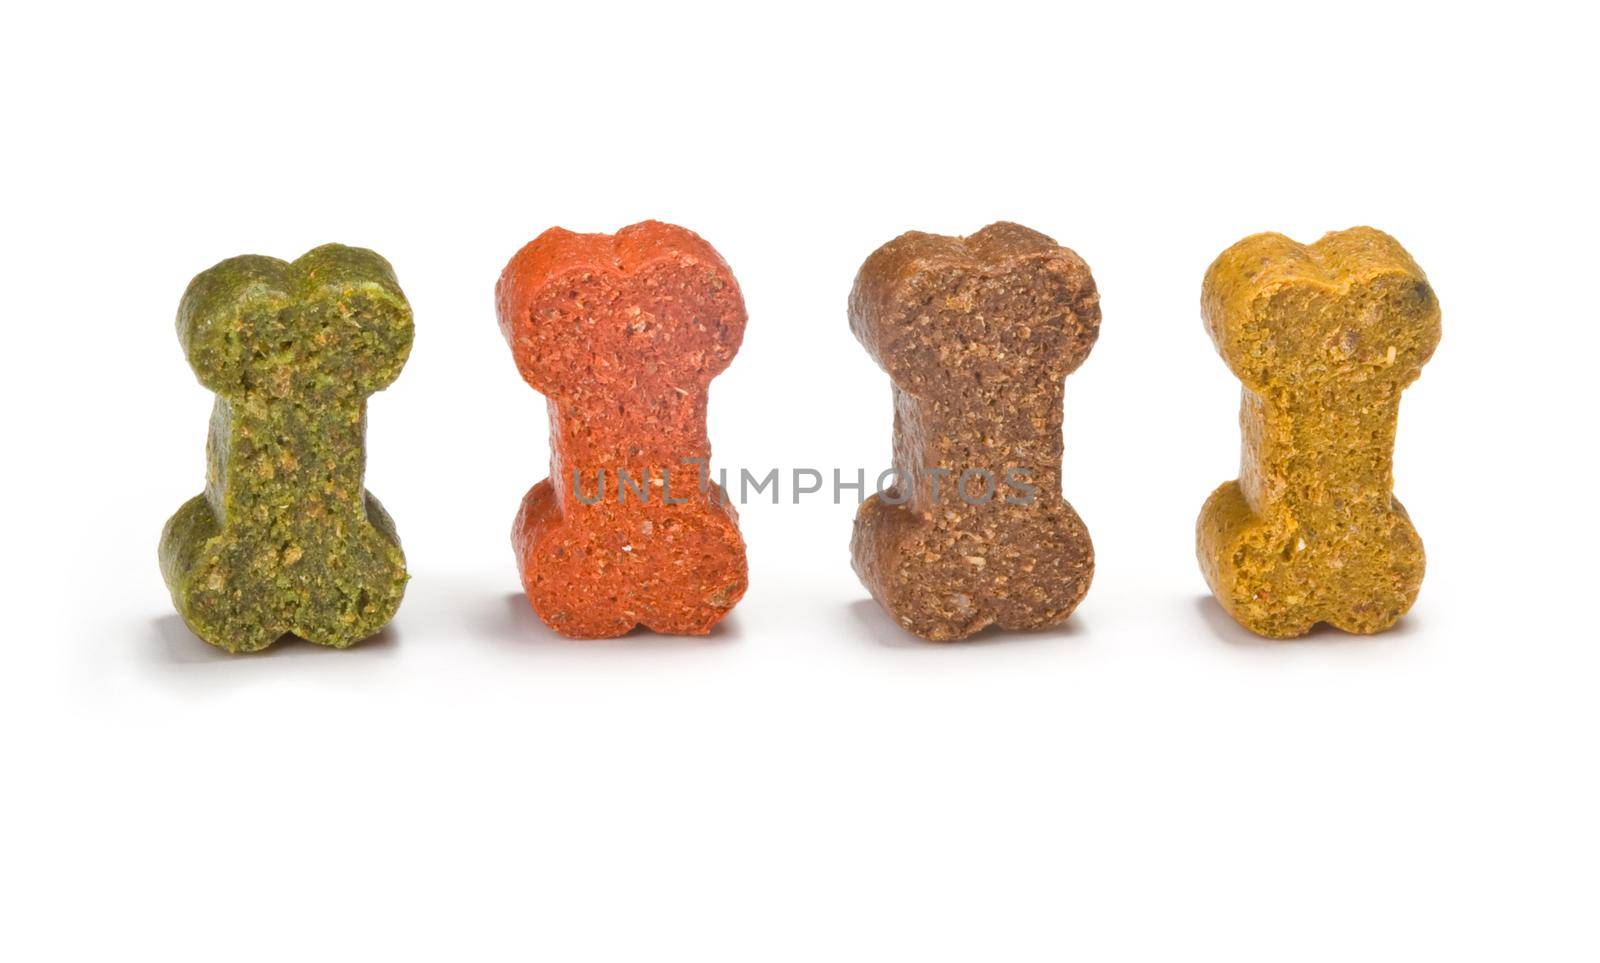 dog food is a close-up on a white background